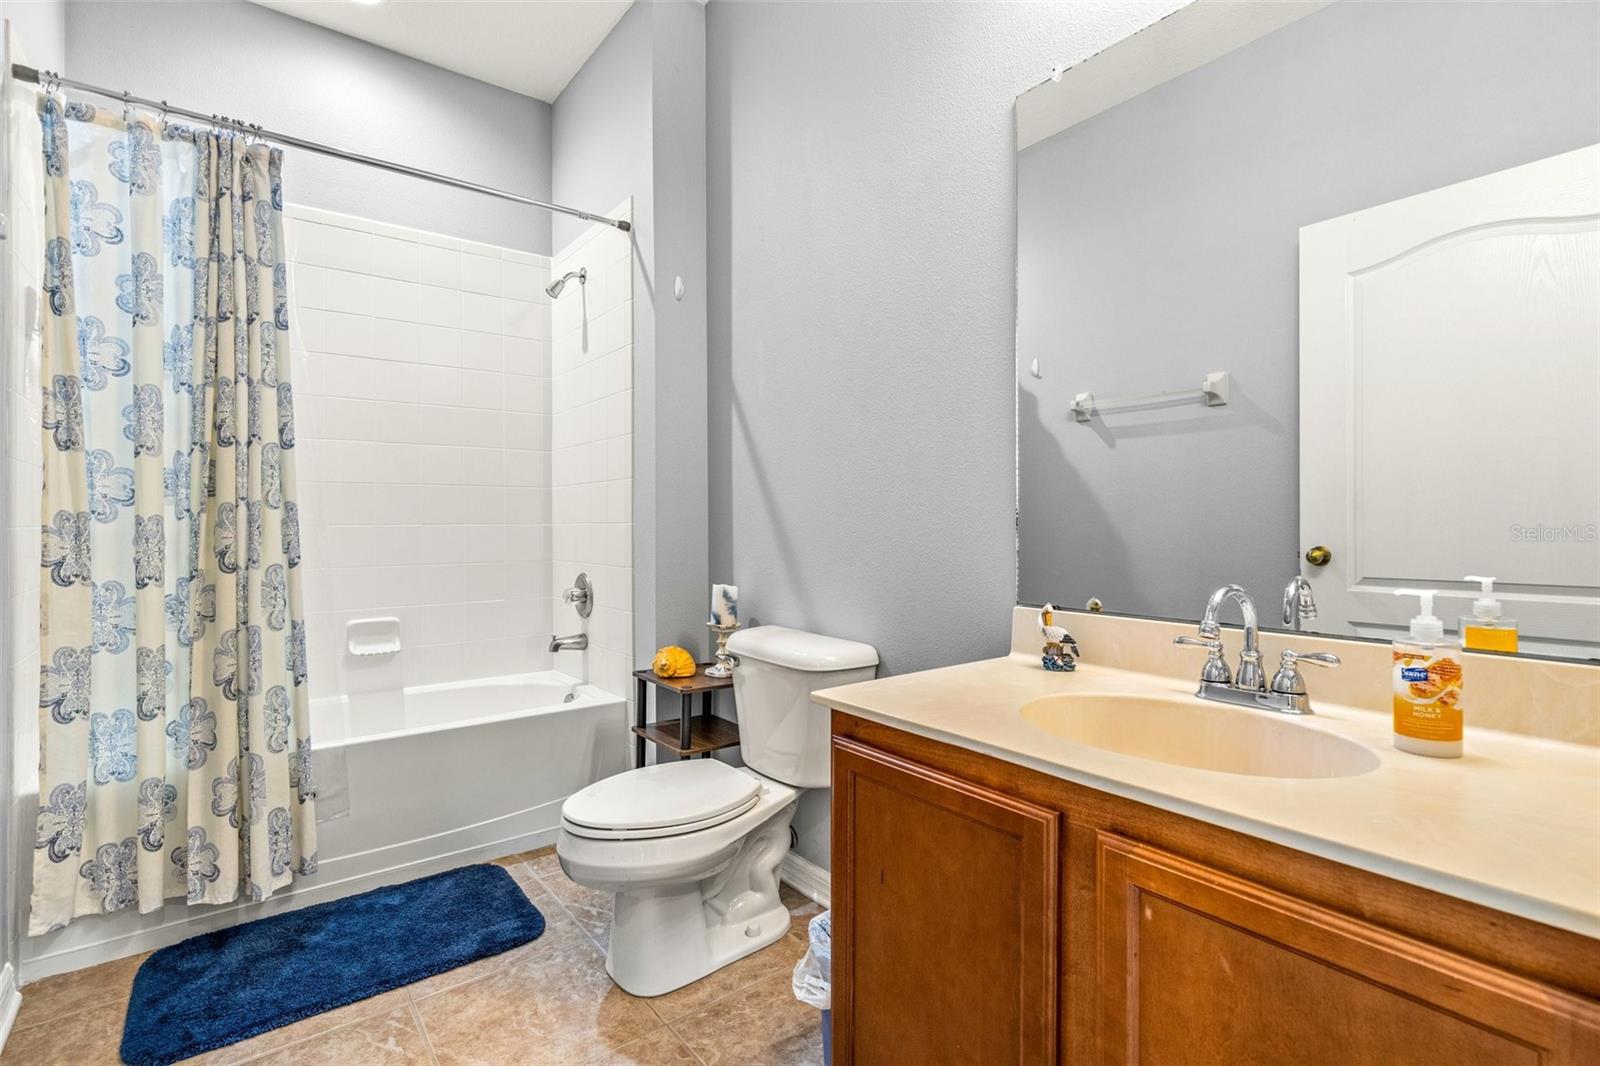 Full Guest Bathroom offers you a large space!